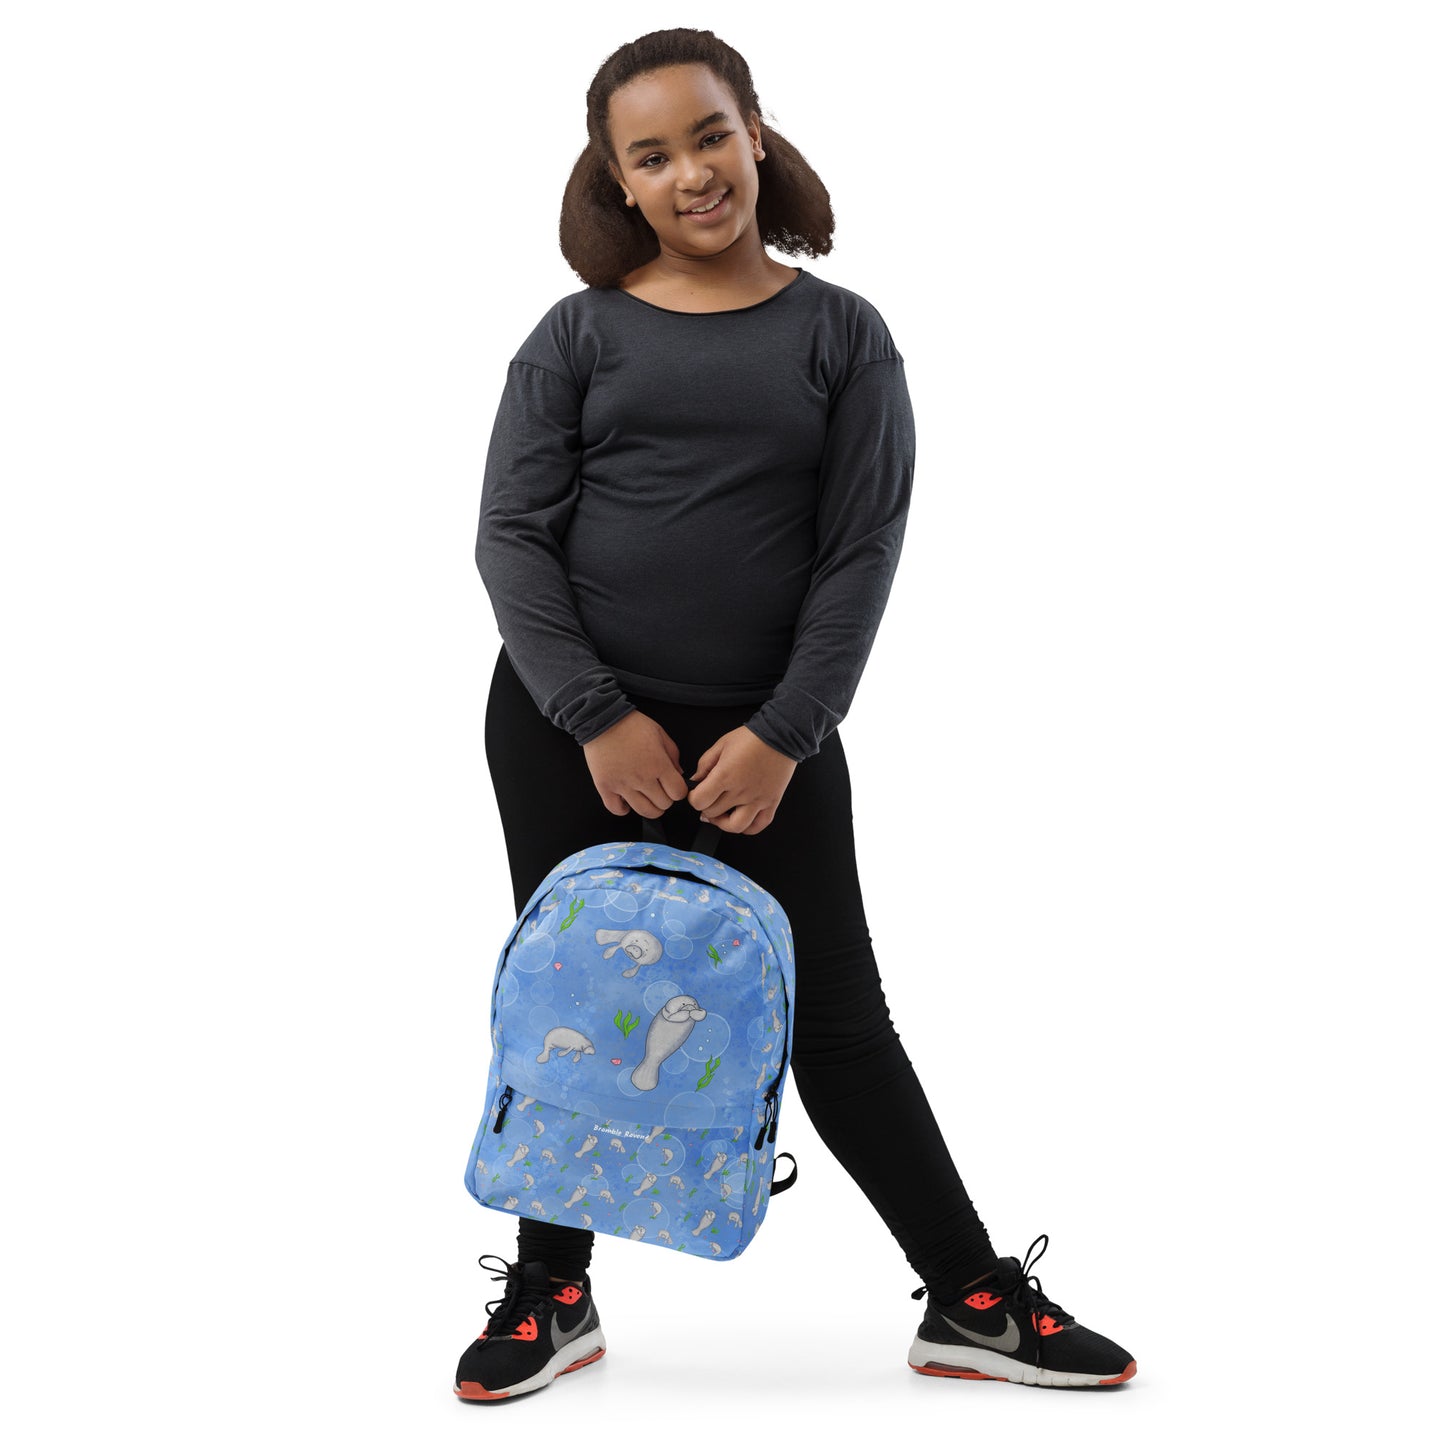 Medium-sized backpack featuring manatees, seashells, seaweed and bubbles on a blue background. Made with water resistant polyester, ergonomic straps, and comfort mesh back. Has a compartment that can hold a 15 inch laptop. Has a hidden zipper pocket on the back. Shown being held by a girl.